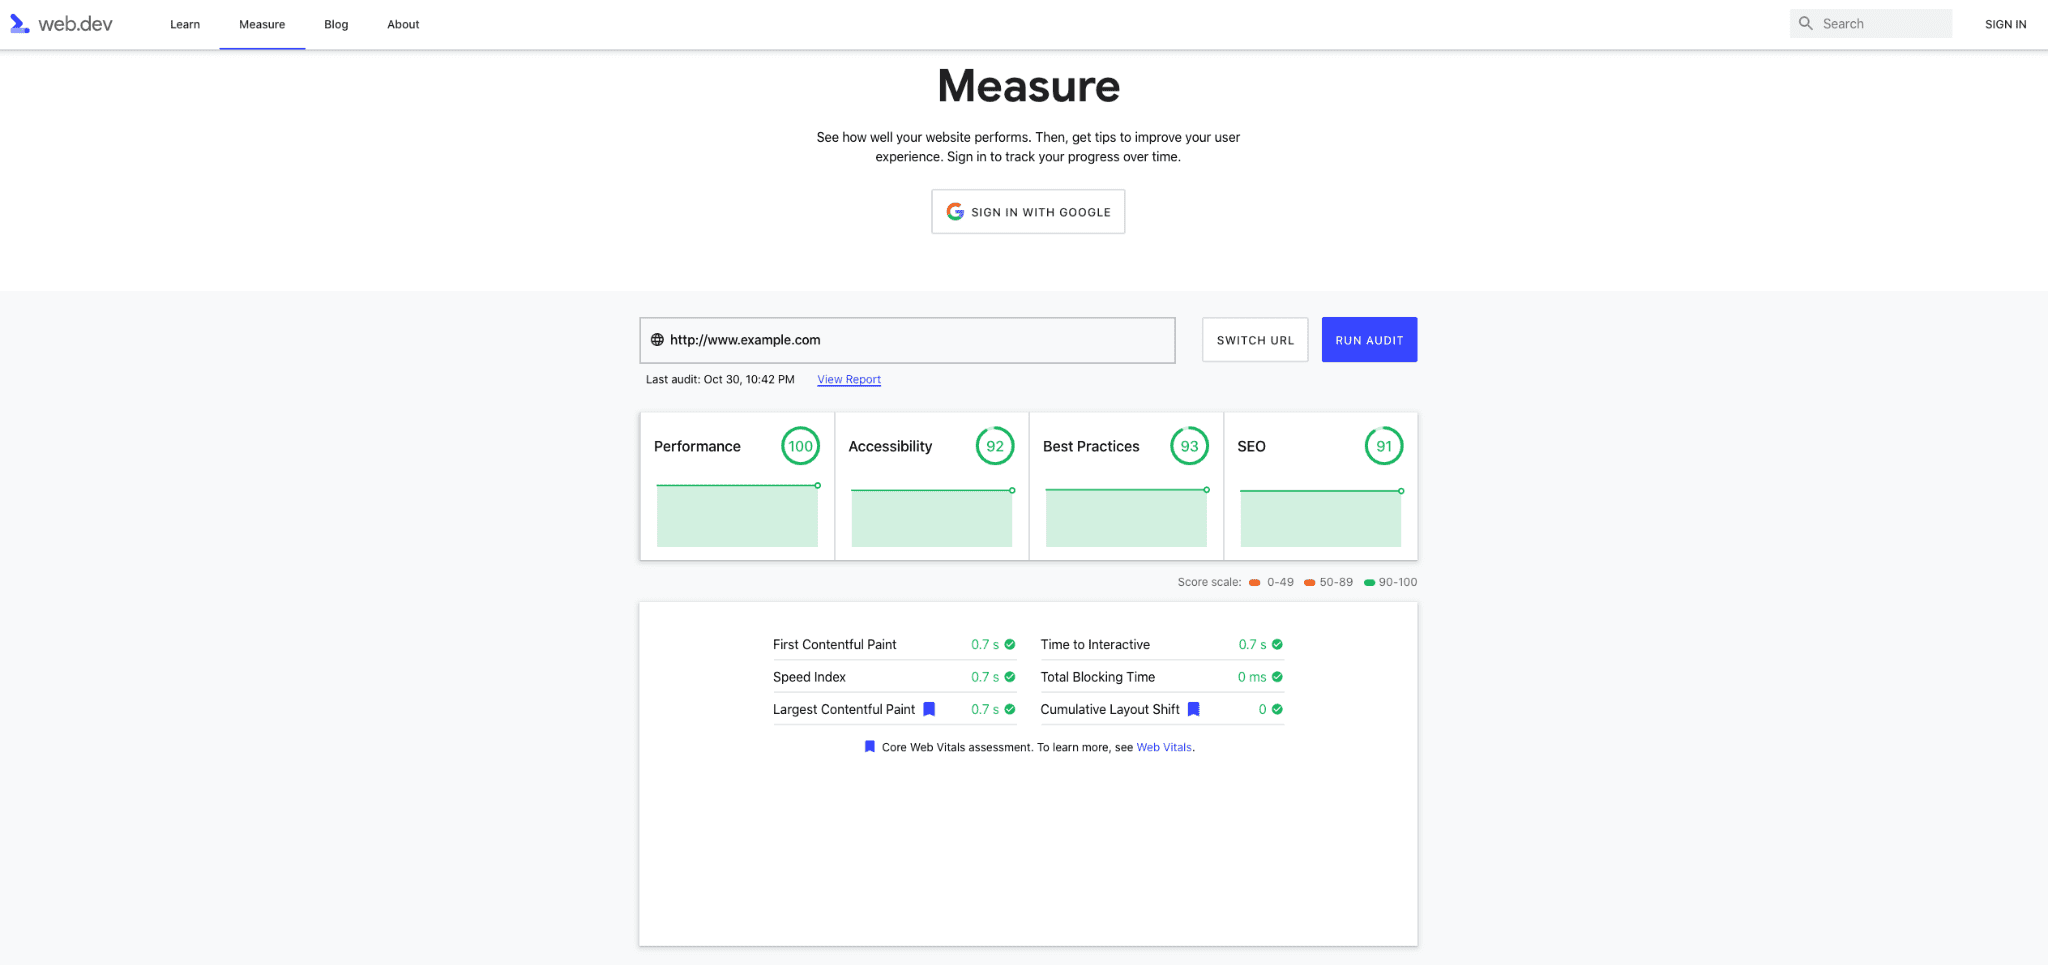 The old version of the measure page.